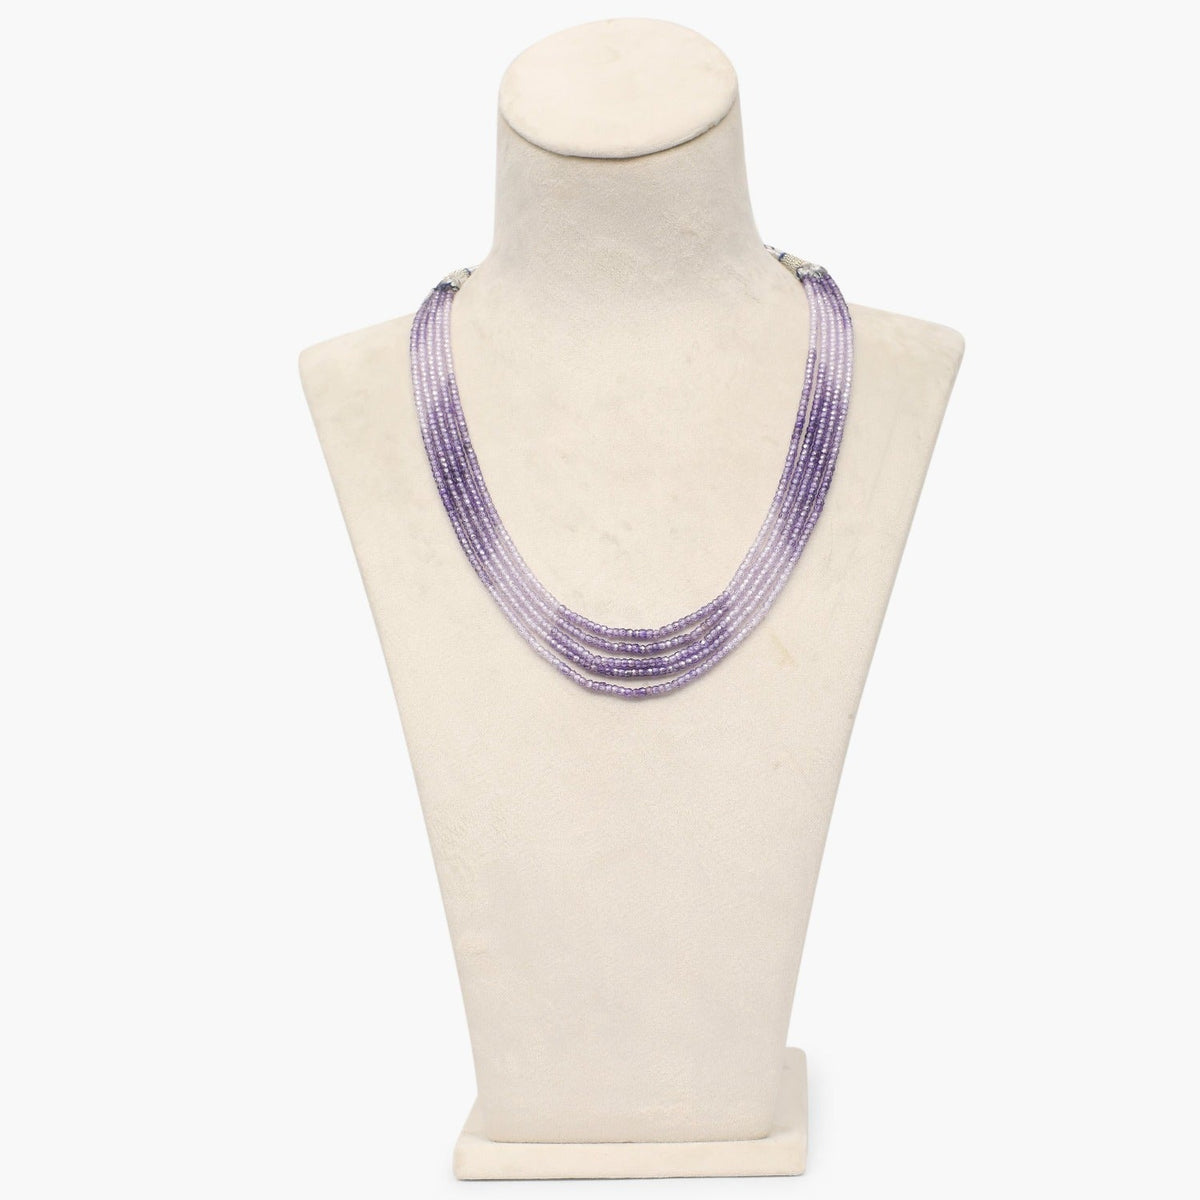 Lavender shaded Faceted Cubic Zirconia Beads Necklace